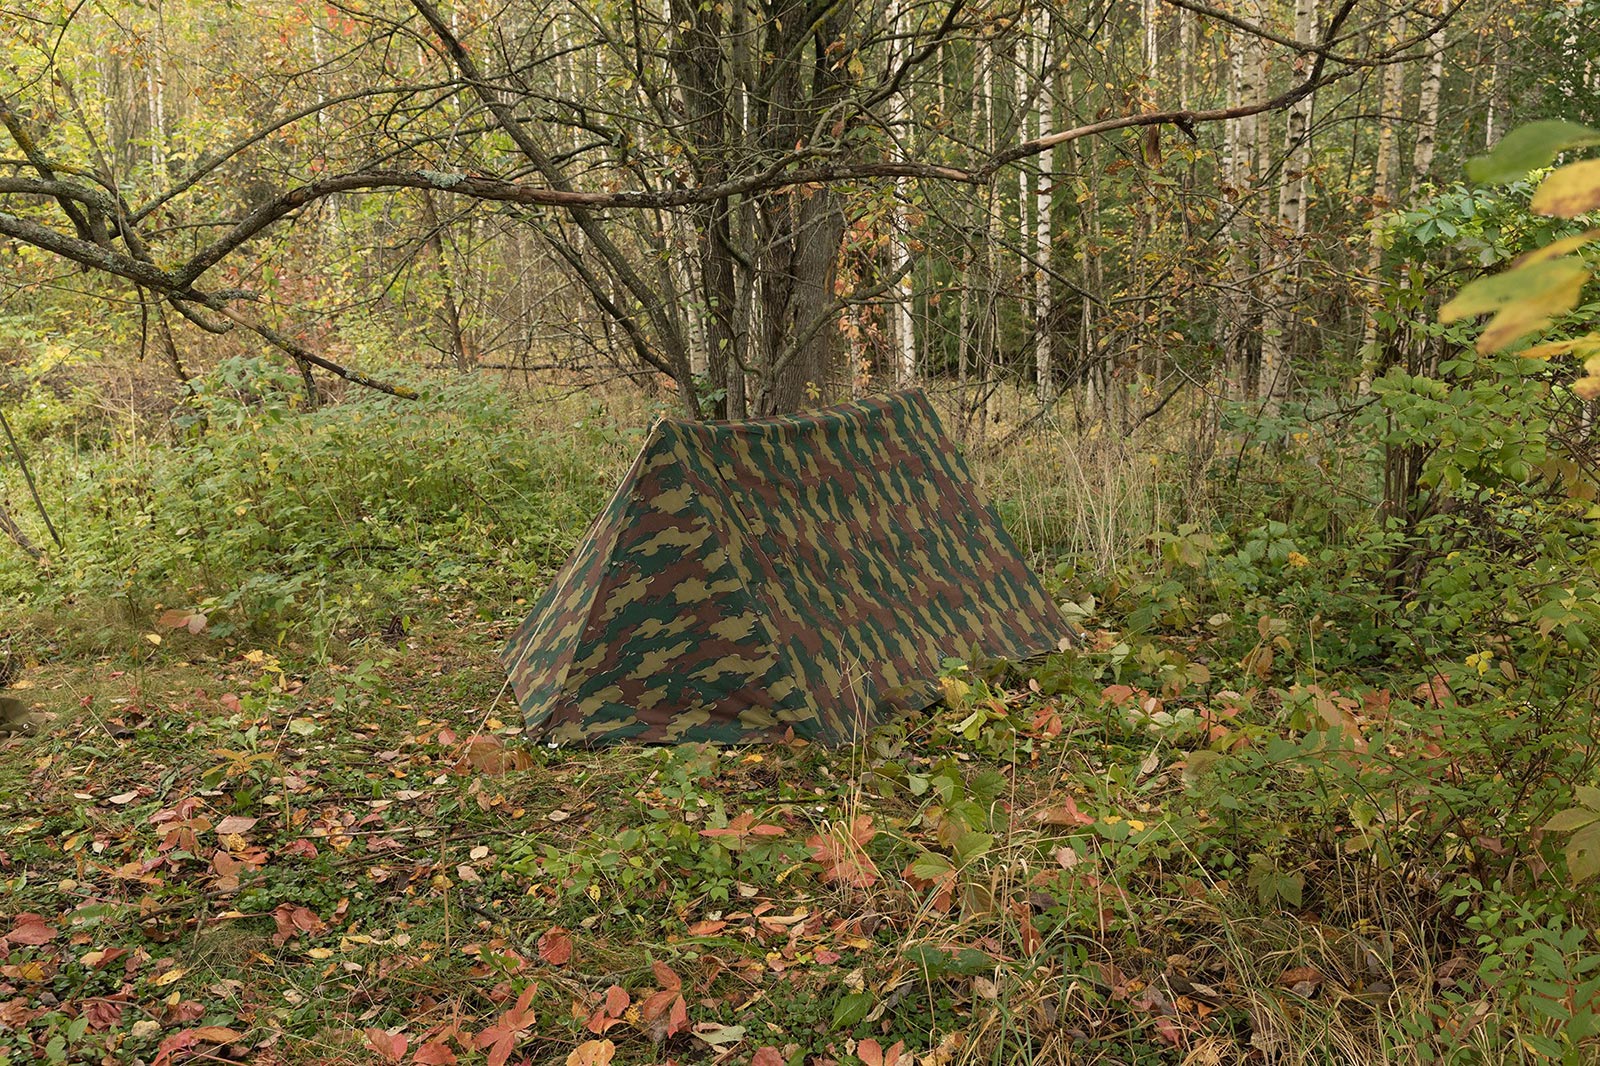 Belgian A-frame tent in the jigsaw camo set up in a forest